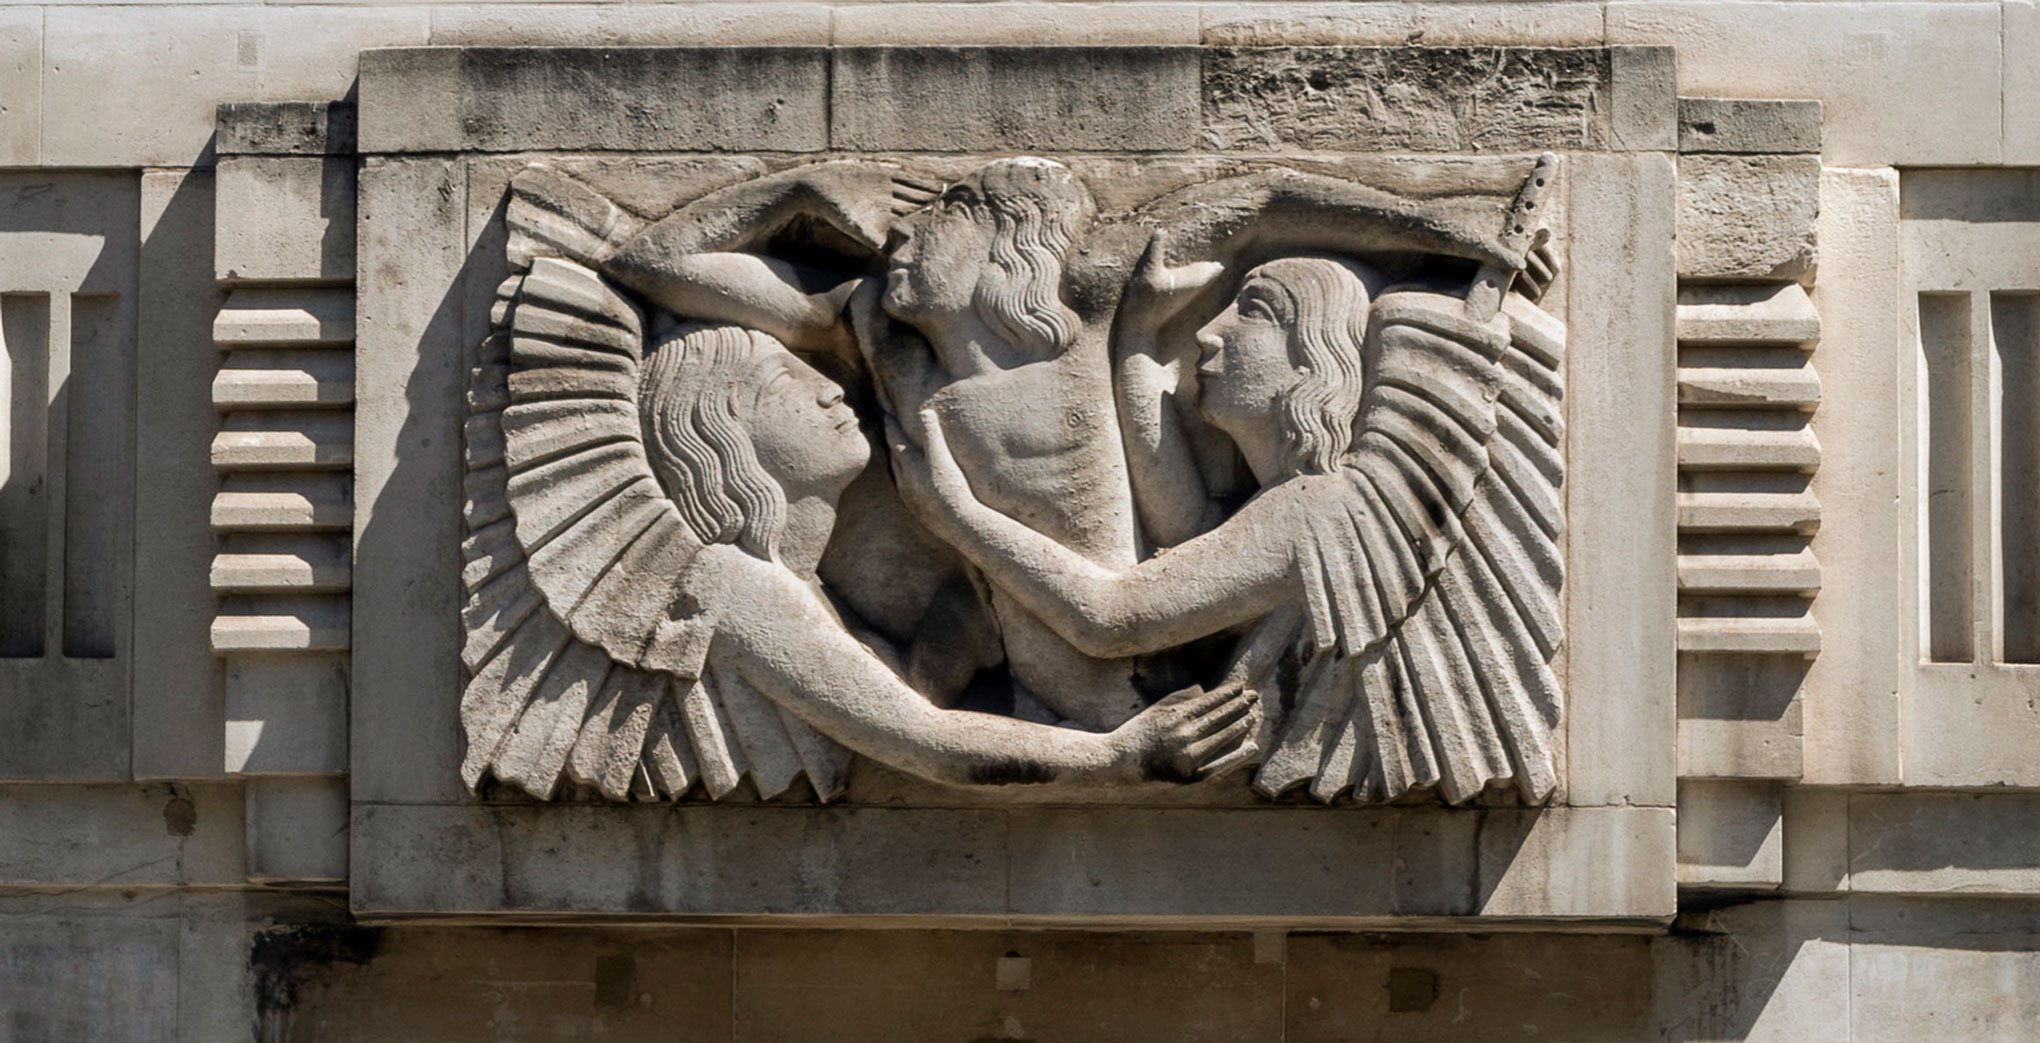 A relief sculpture on a building depicting two winged figures embracing a central figure who  is carrying a flute.